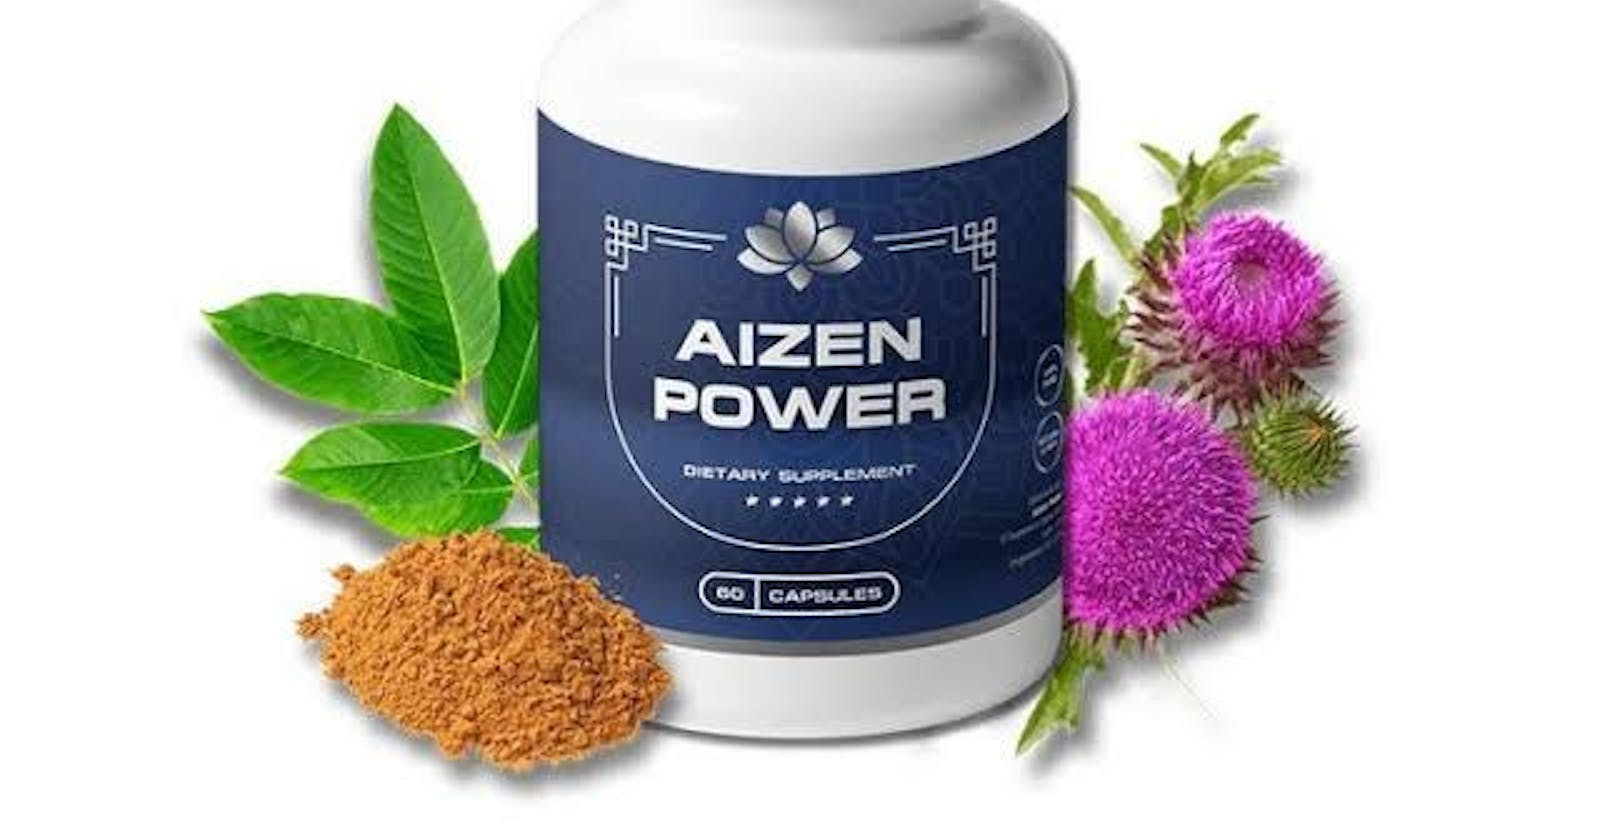 Take Charge of Your Sexual Wellness with Aizen Power